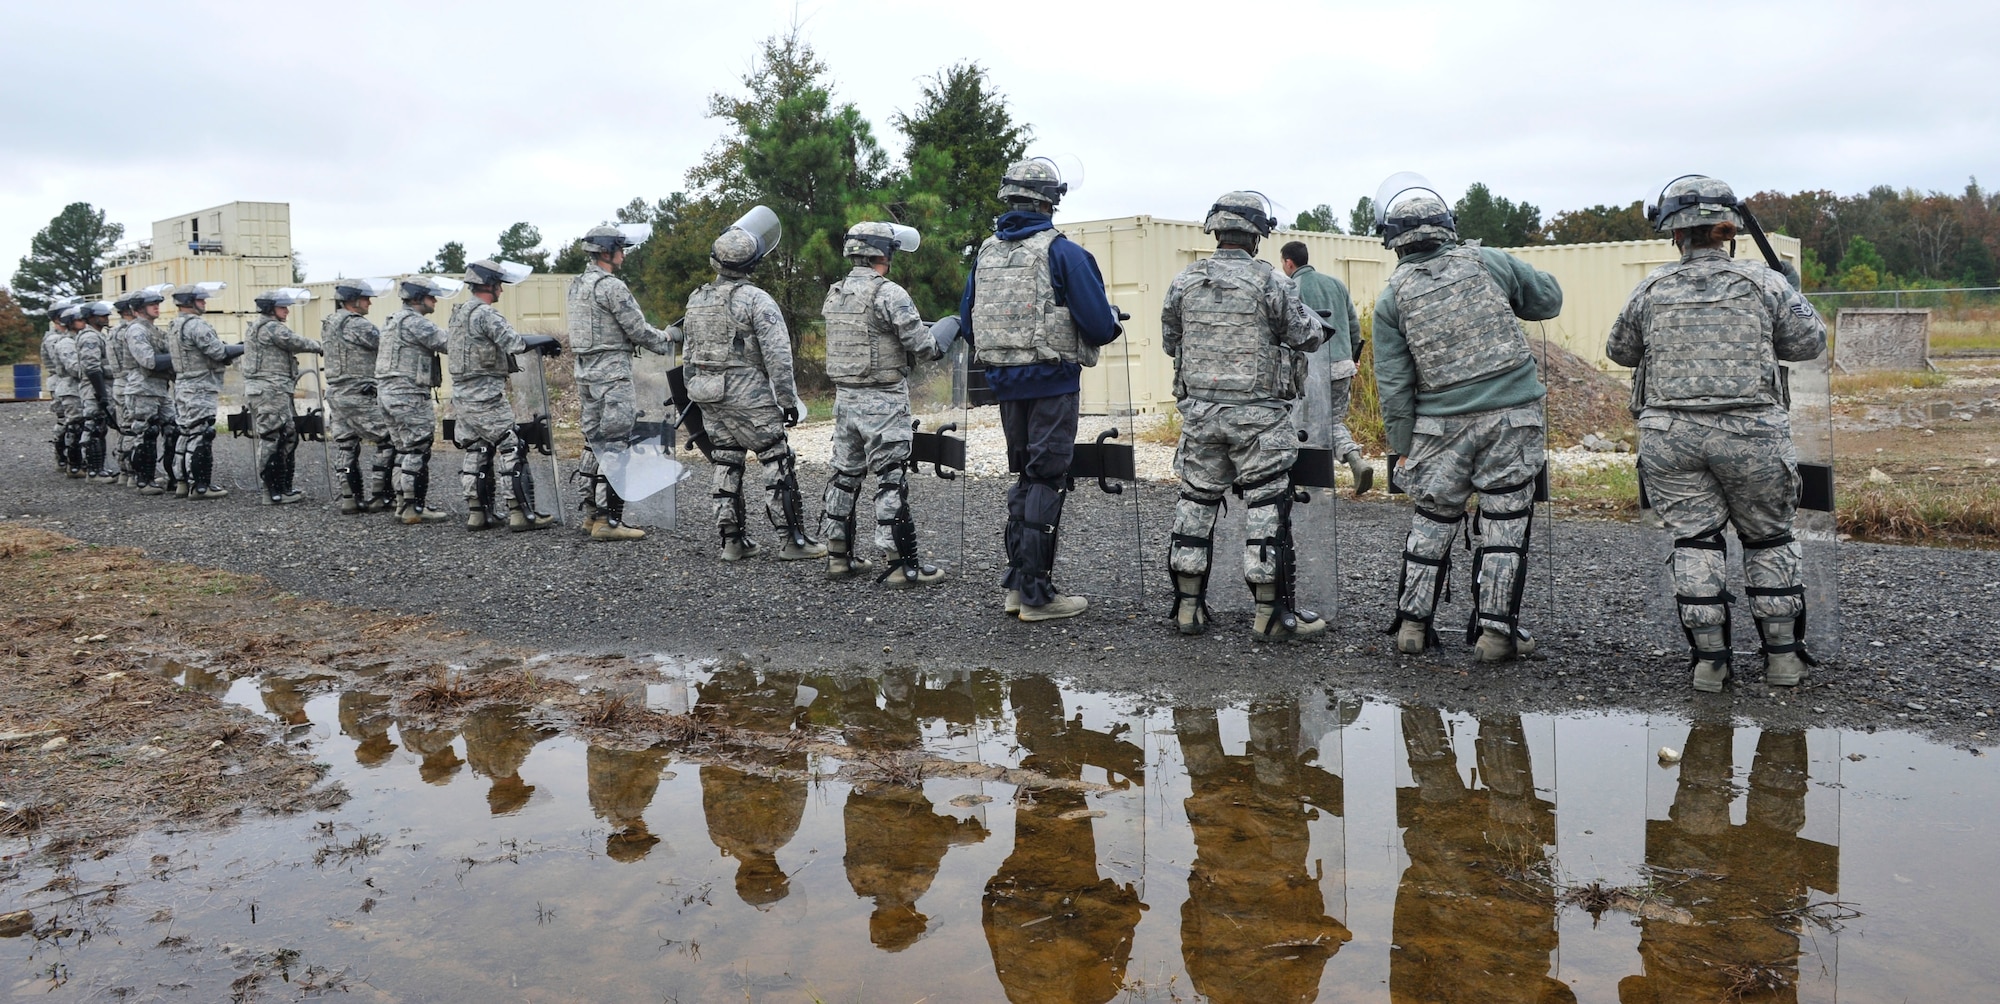 Defenders from the 19th Security Forces Squadron prepare for maximum protection as a unit during riot training Oct. 13, 2016, at Little Rock Air Force Base, Ark. (U.S. Air Force photo by Staff Sgt. Regina Edwards)